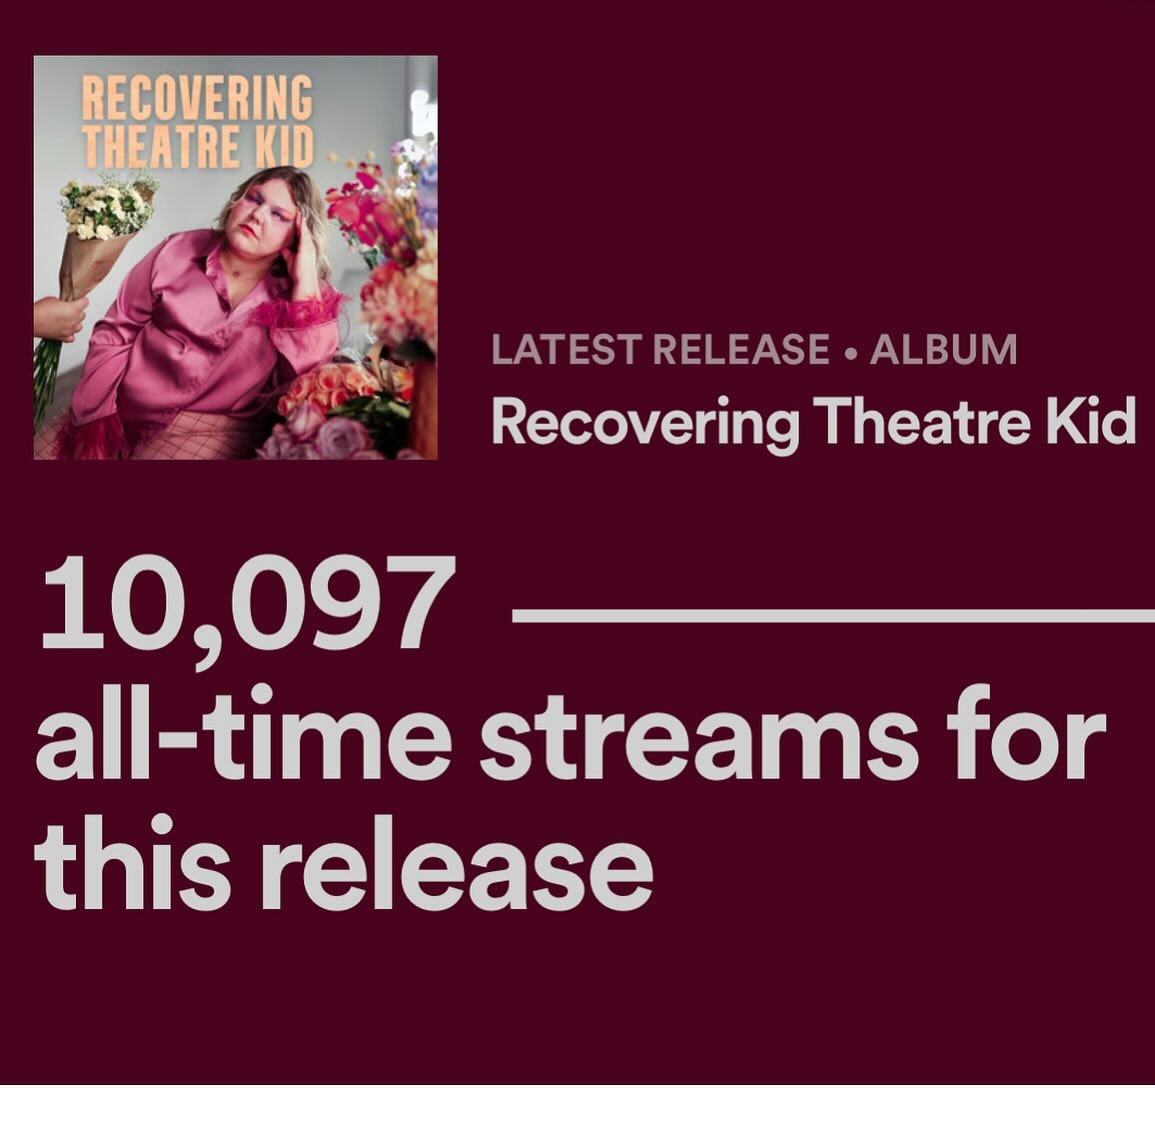 Fank you so much for listening to my music 😢😢💜💜

And massive shoutout to @tinnitist for this beautiful little review of Recovering Theatre Kid!!! While it&rsquo;s hard for us indie kids to make this career work these days, indie blogs and journal